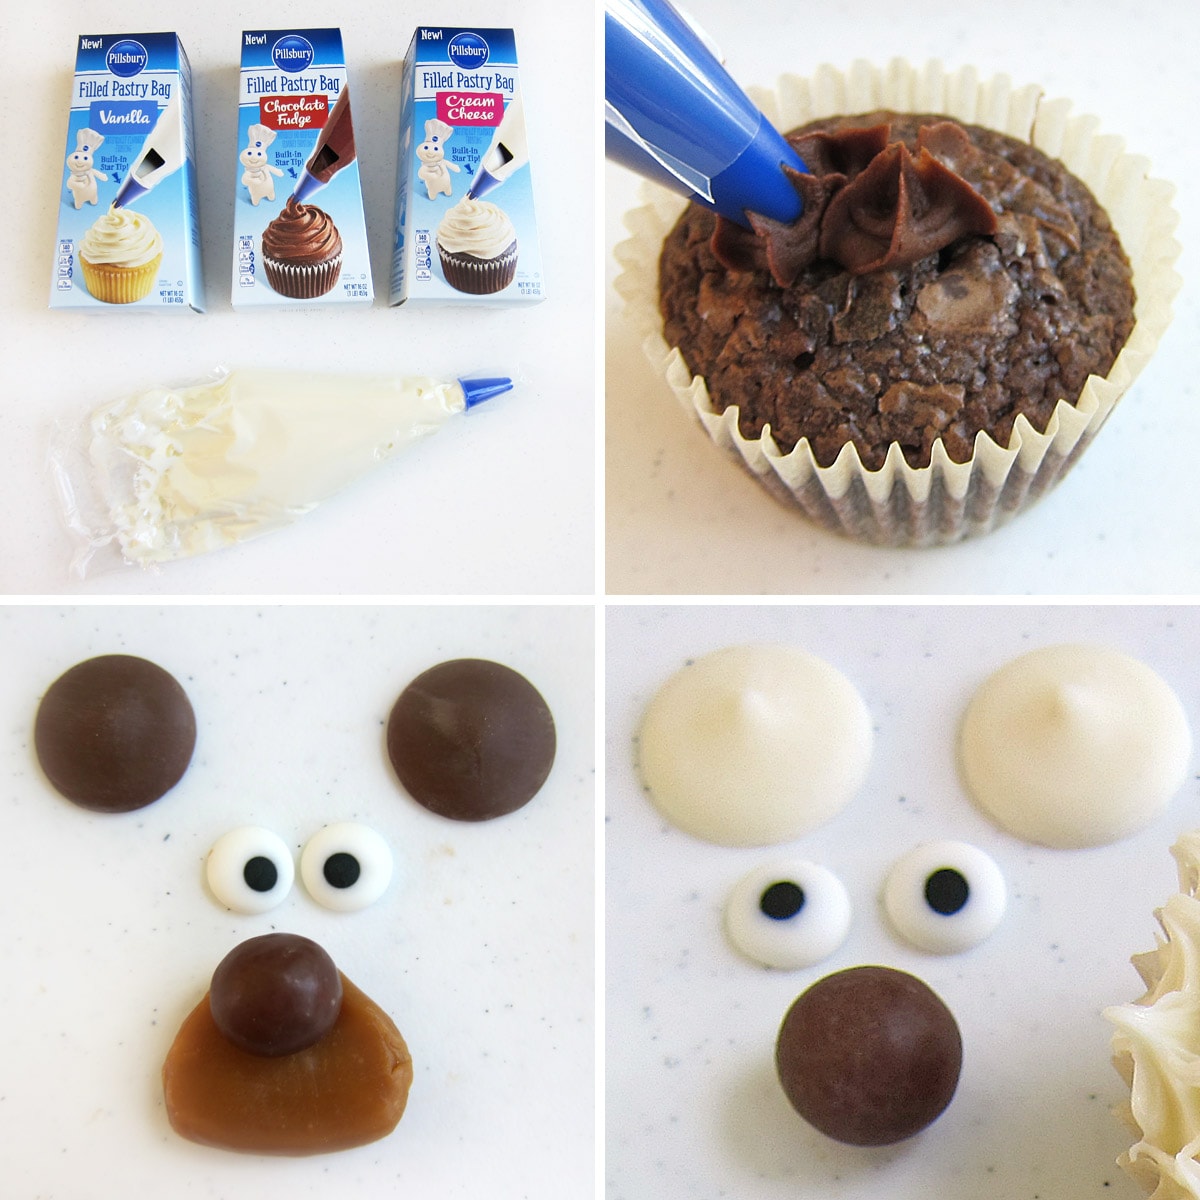 easy bear cupcakes ingredients including pre-filled frosting tubes, cupcakes, light cocoa candy melts, white candy melts, candy eyes, malt balls, caramel.